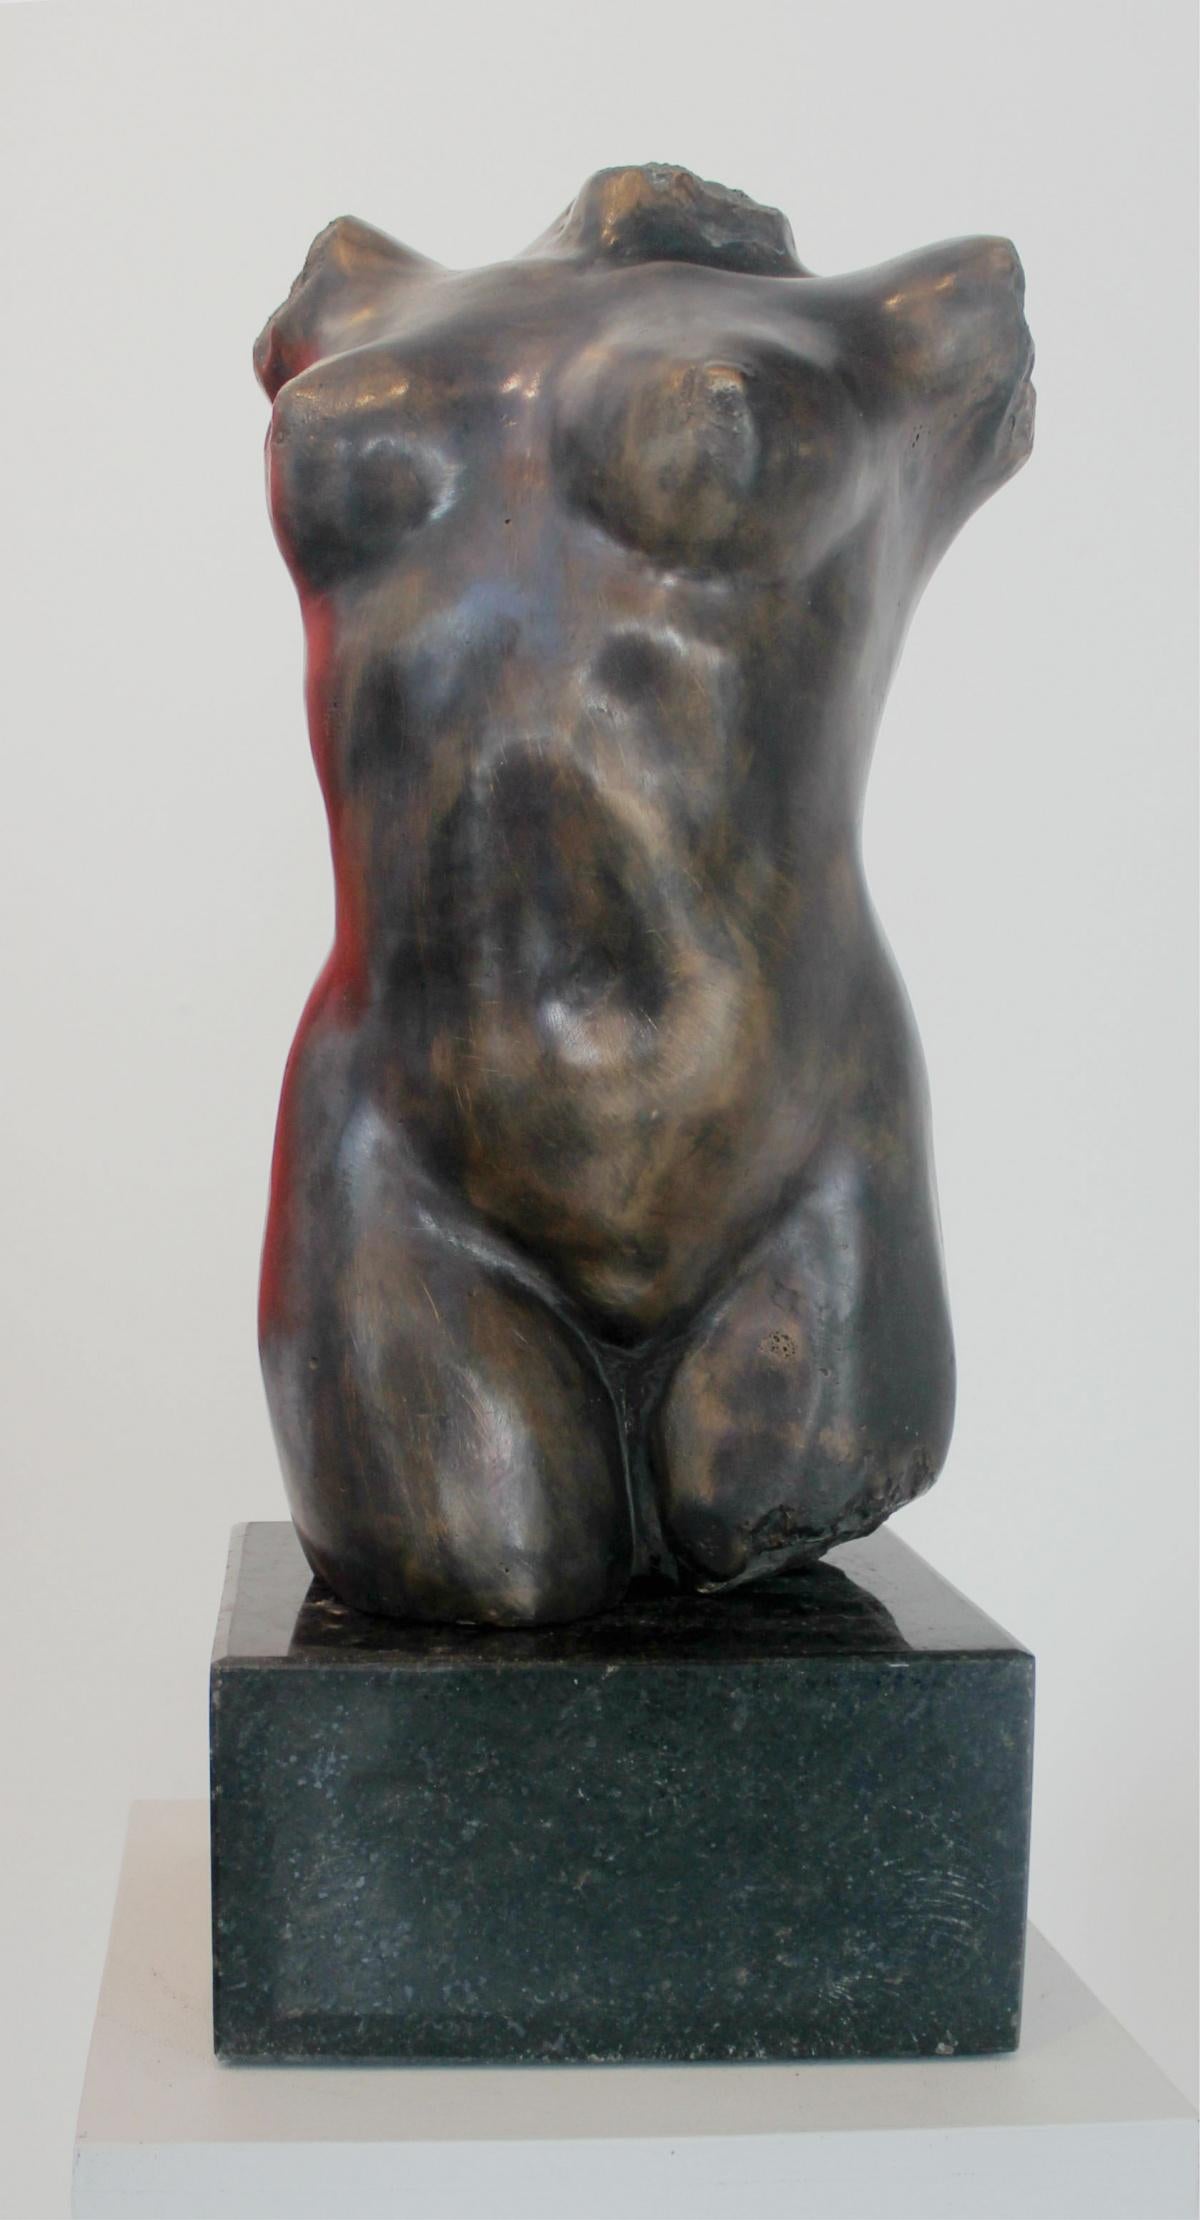 RYSZARD PIOTROWSKI (born in 1952) Sculptor. He graduated from the Academy of Fine Arts in Warsaw. His works include intimate, small forms in marble, bronze and silver. He specializes in repoussage. In the 1970s and 80s he was dealing with portrait